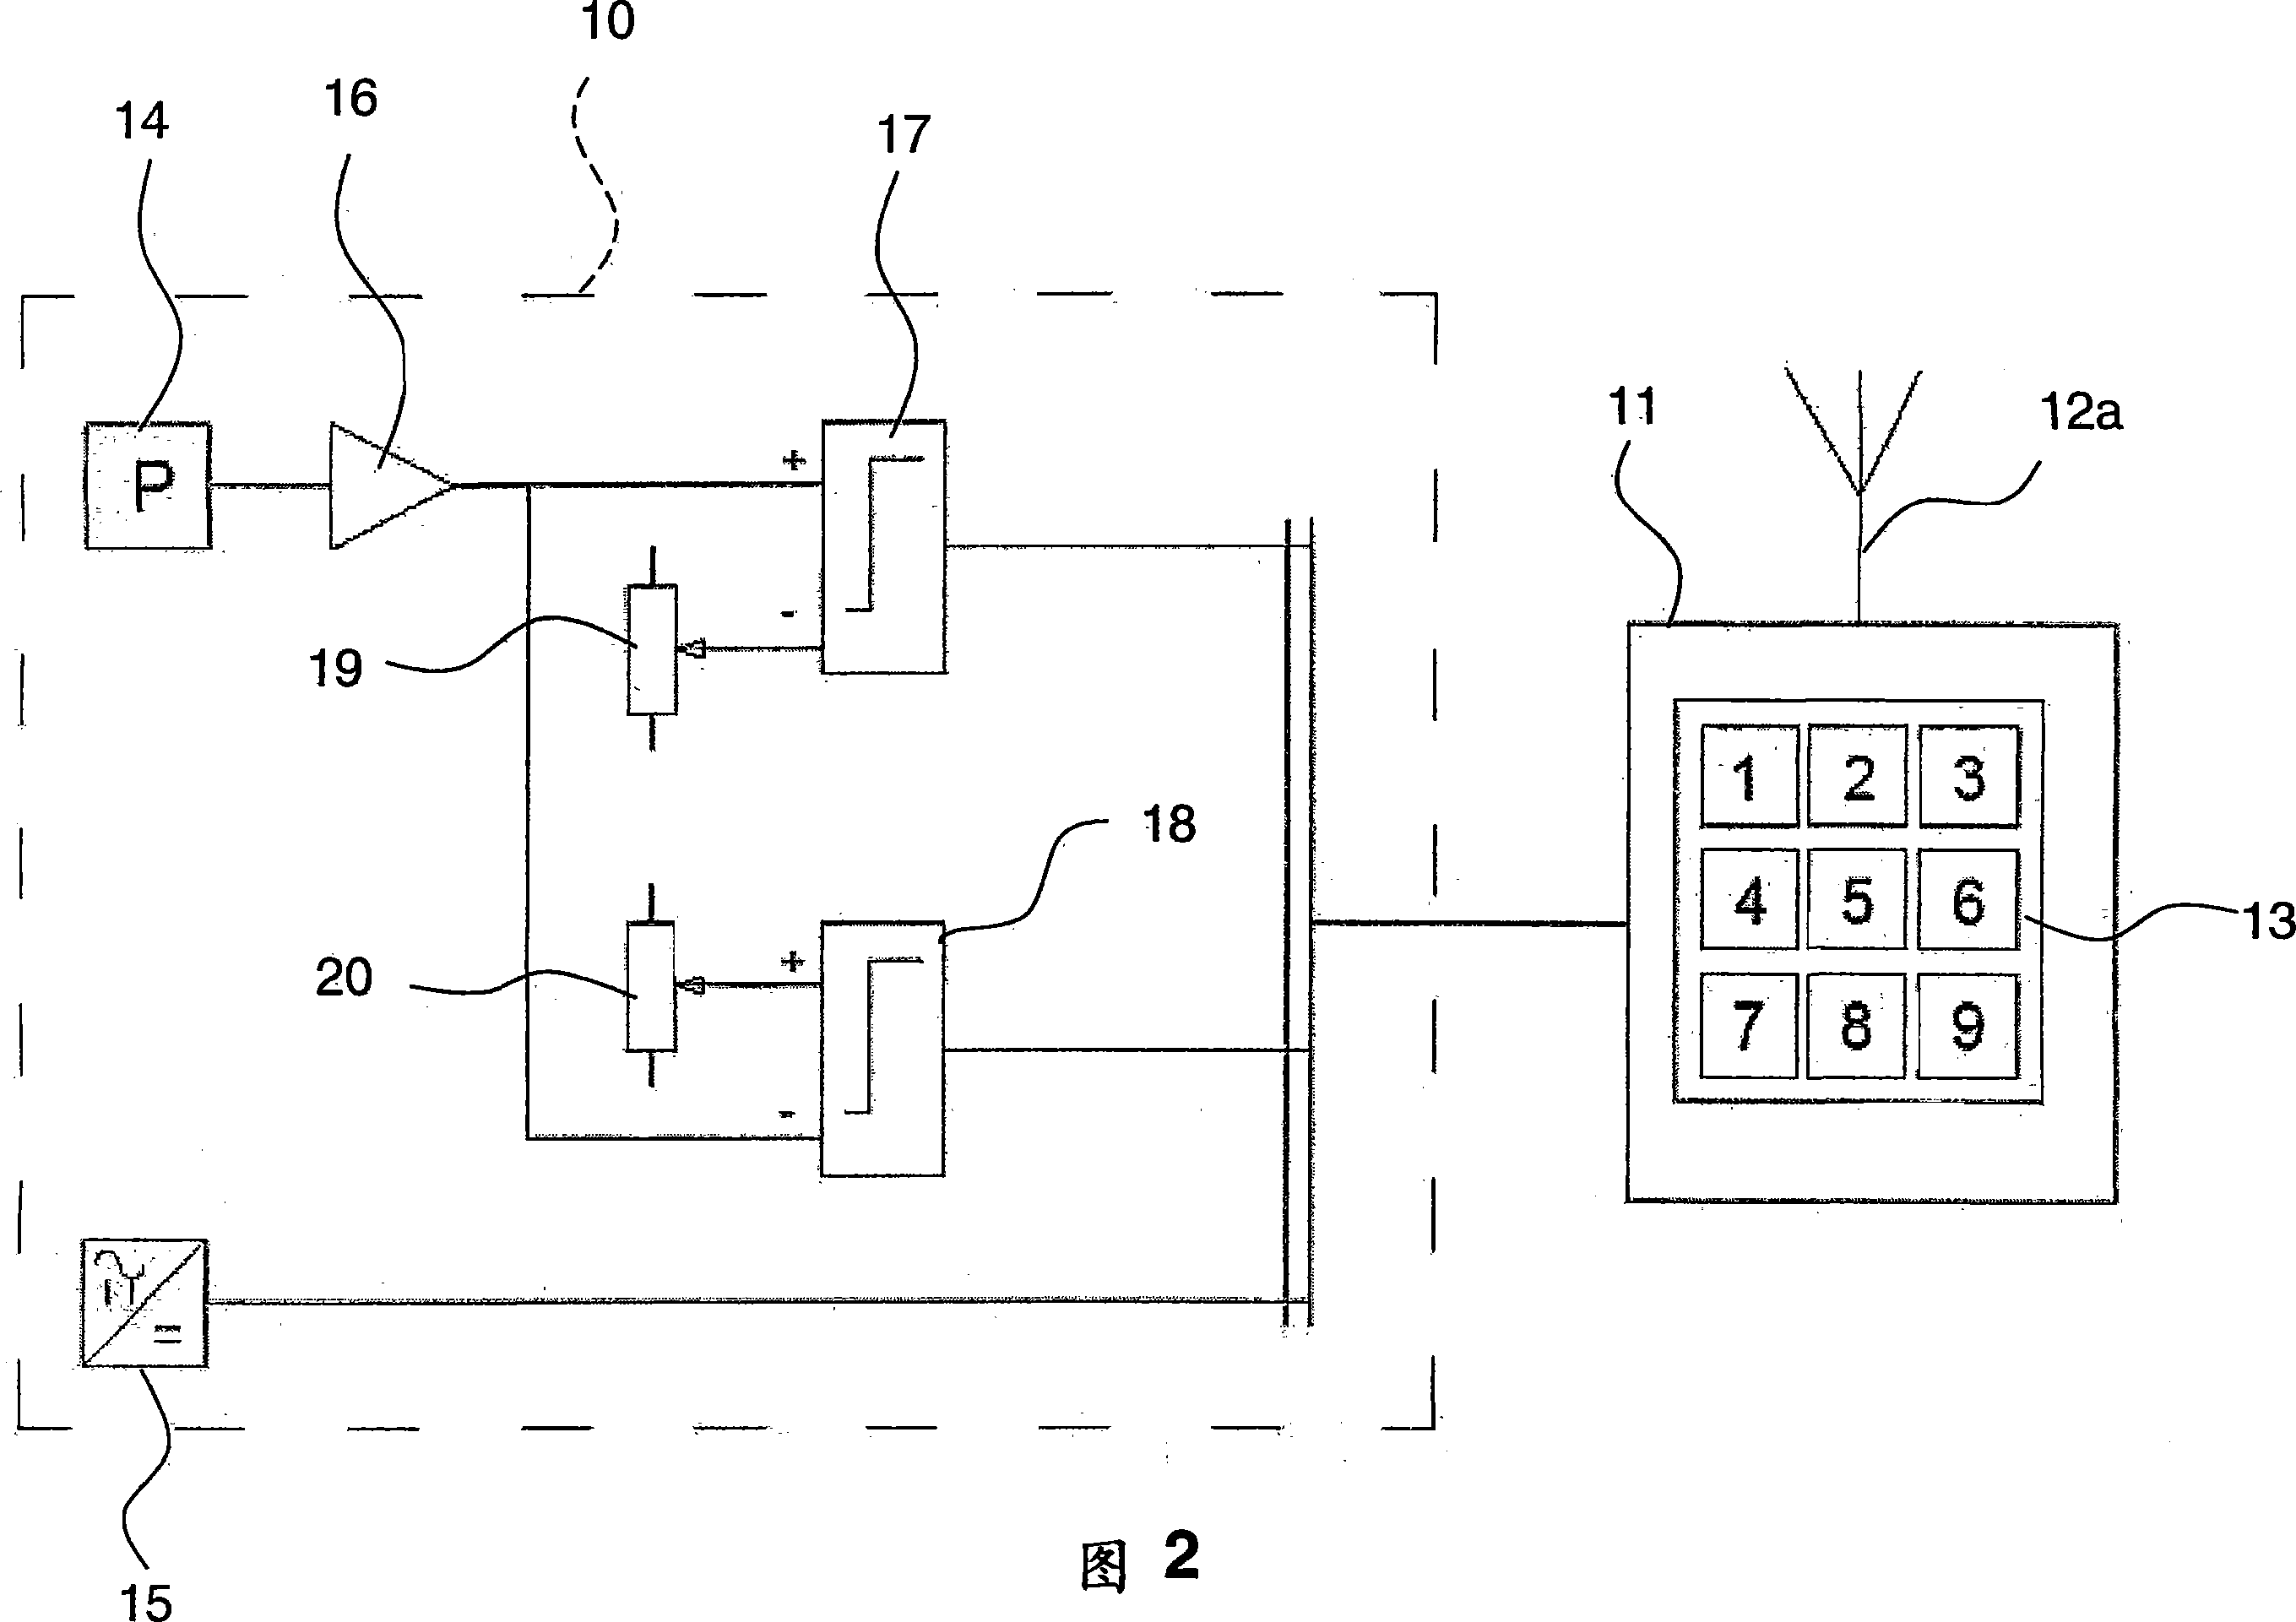 A method and a device for controlling an industrial process or production unit